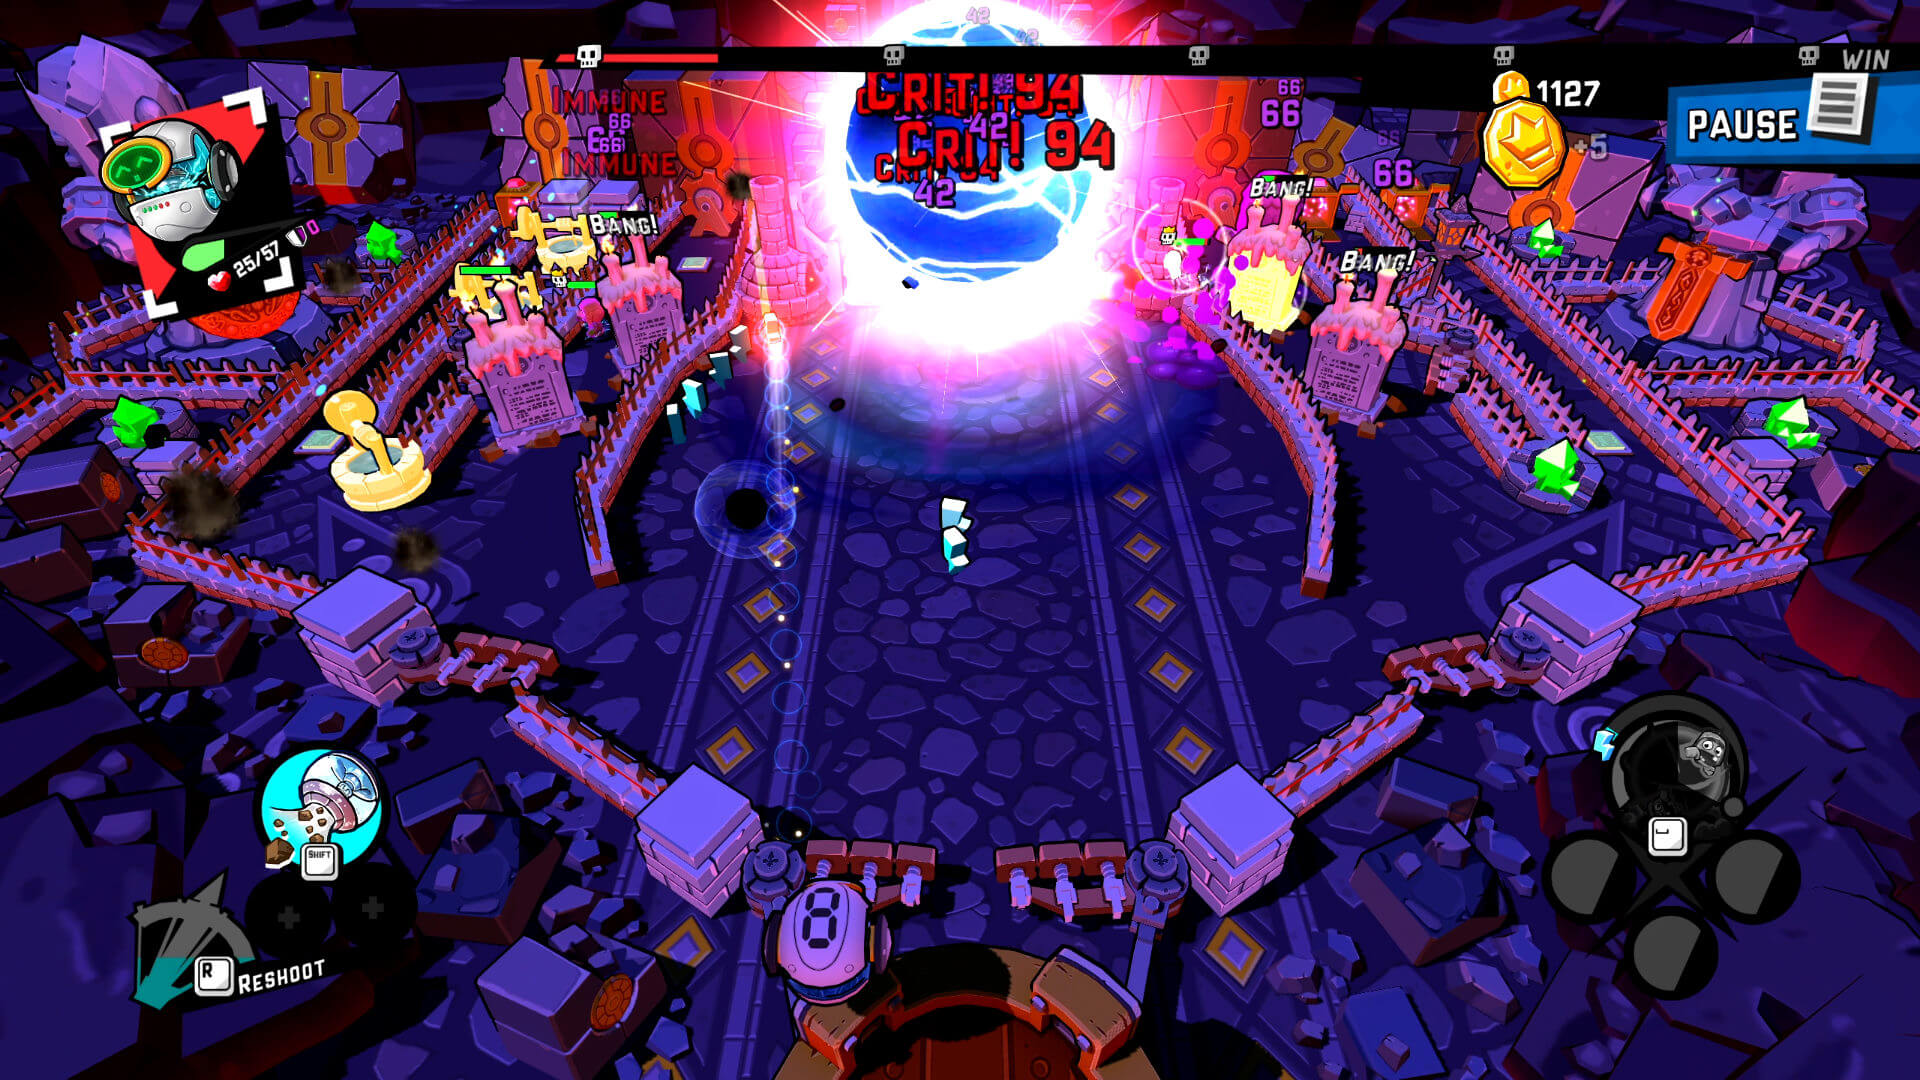 for iphone instal Zombie Rollerz: Pinball Heroes free